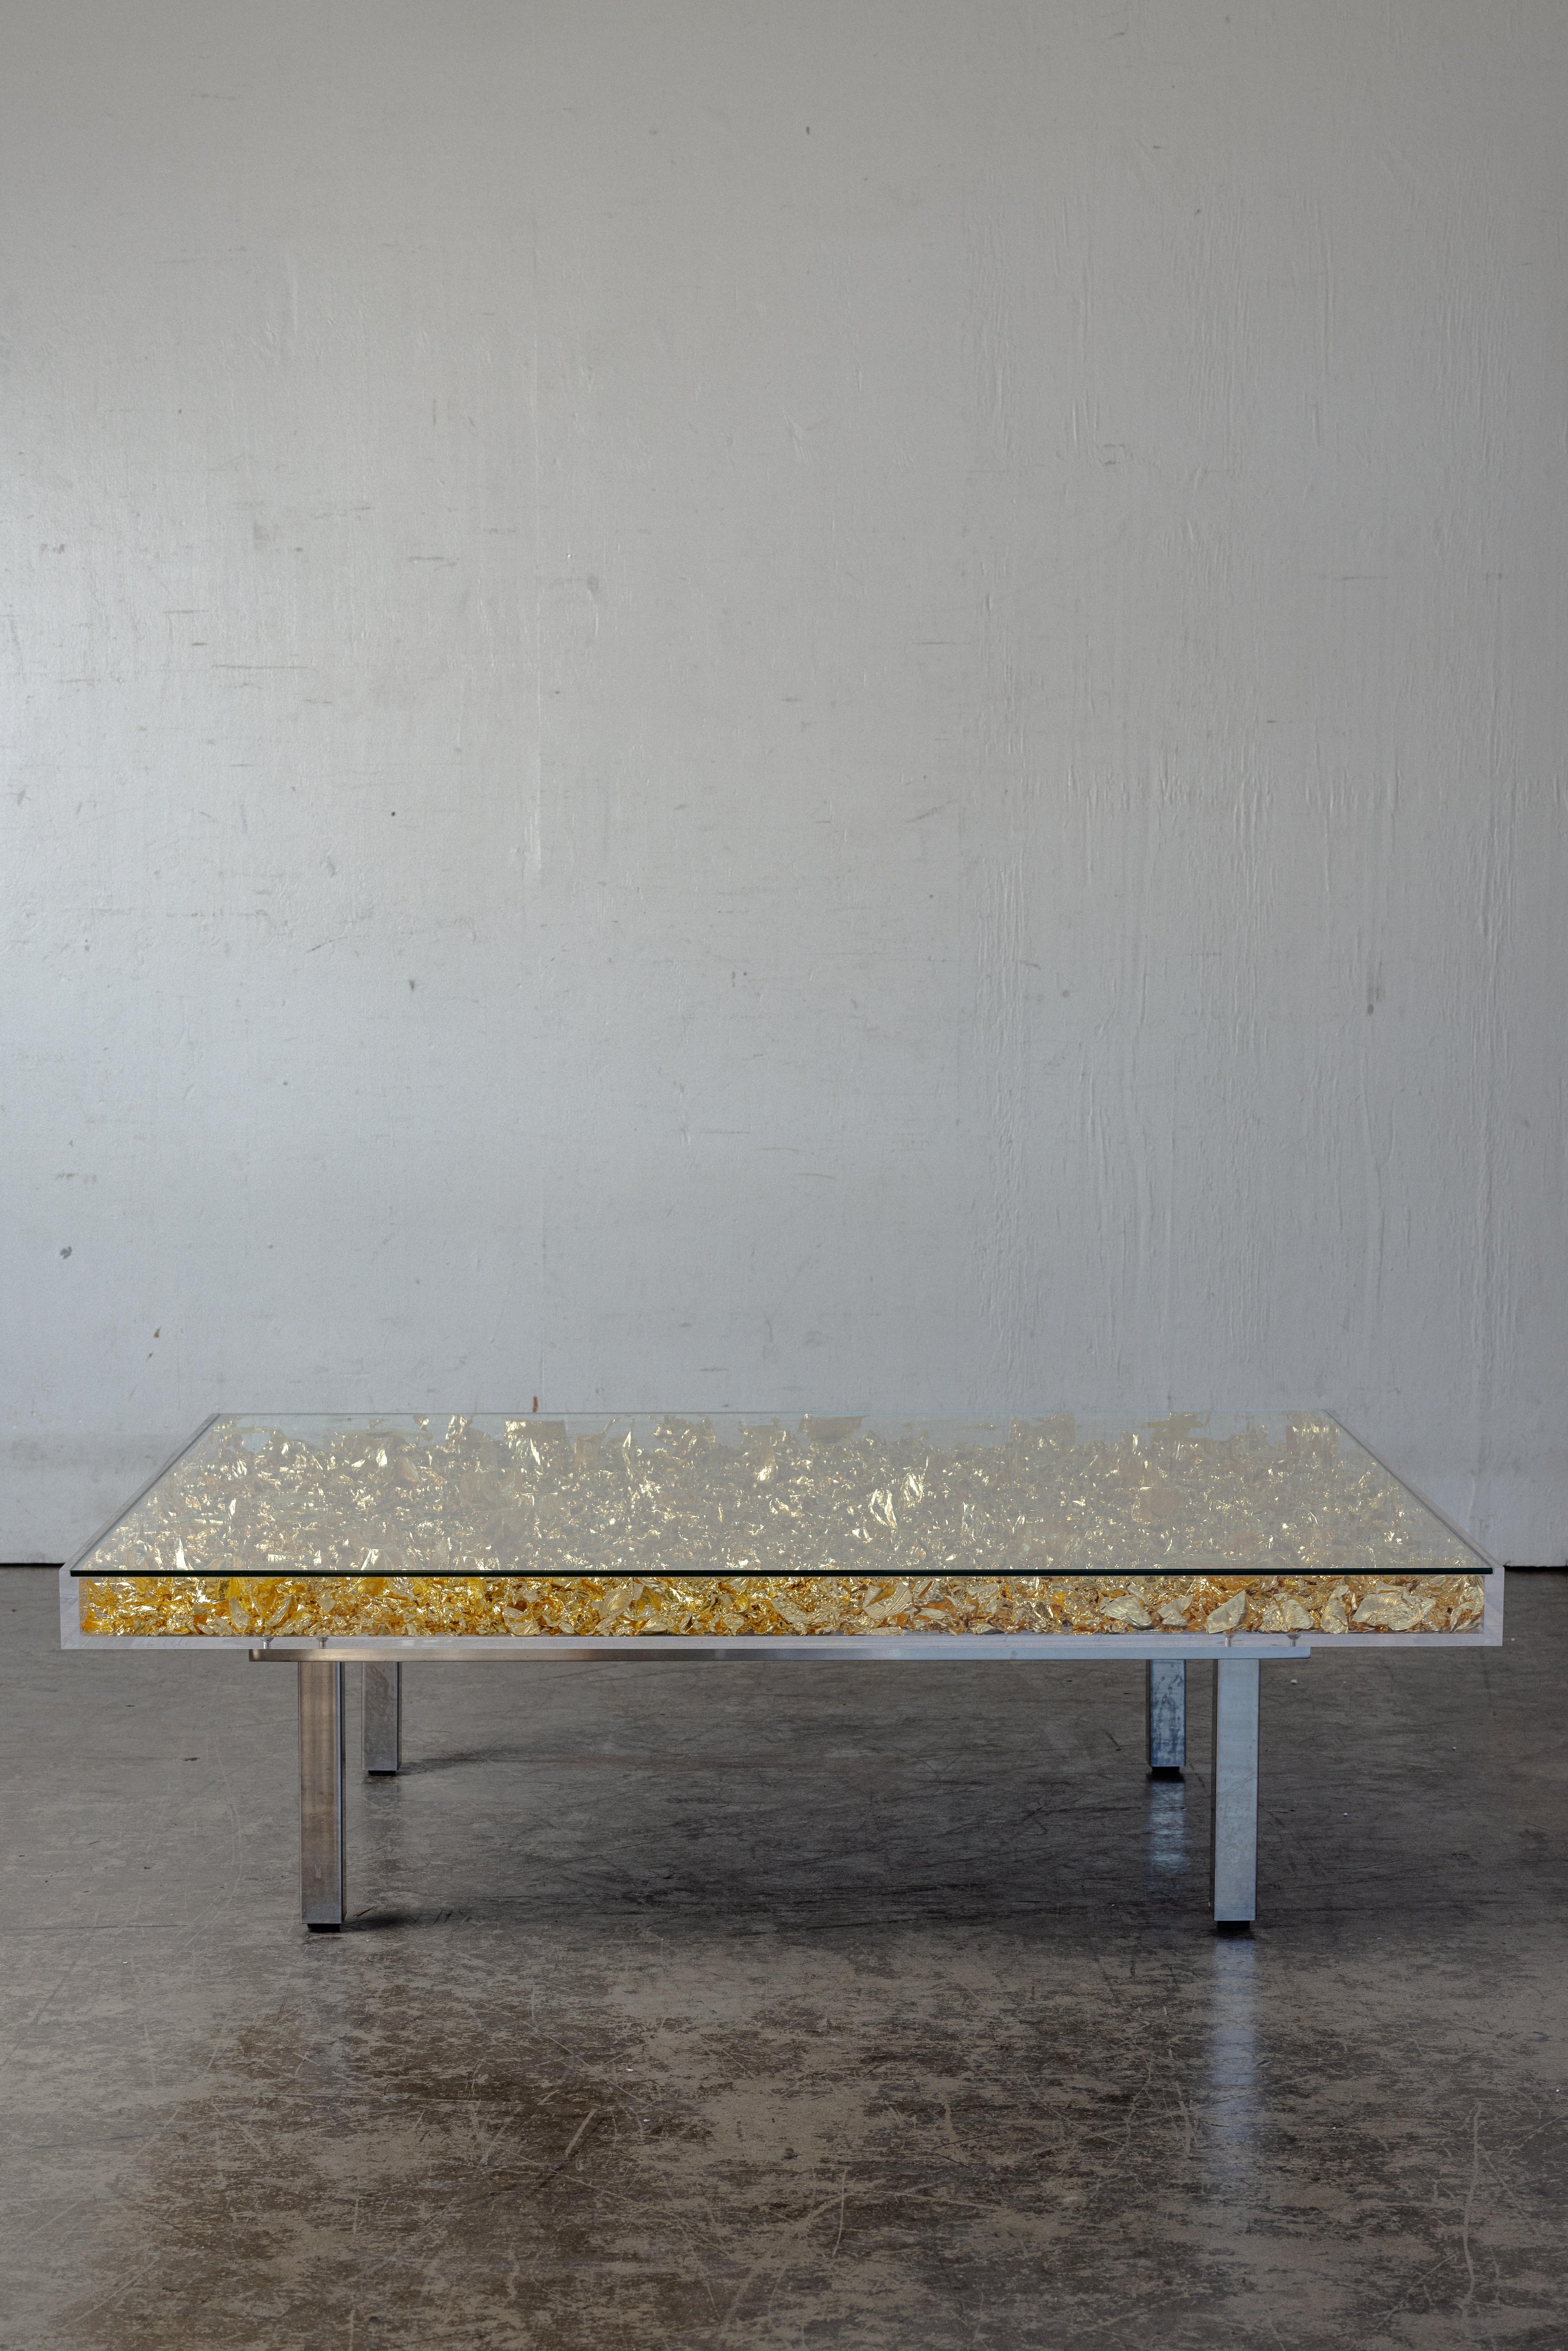 1990's Production of Table Monogold by Yves Klein (France, 1928-1962)

H 14.5